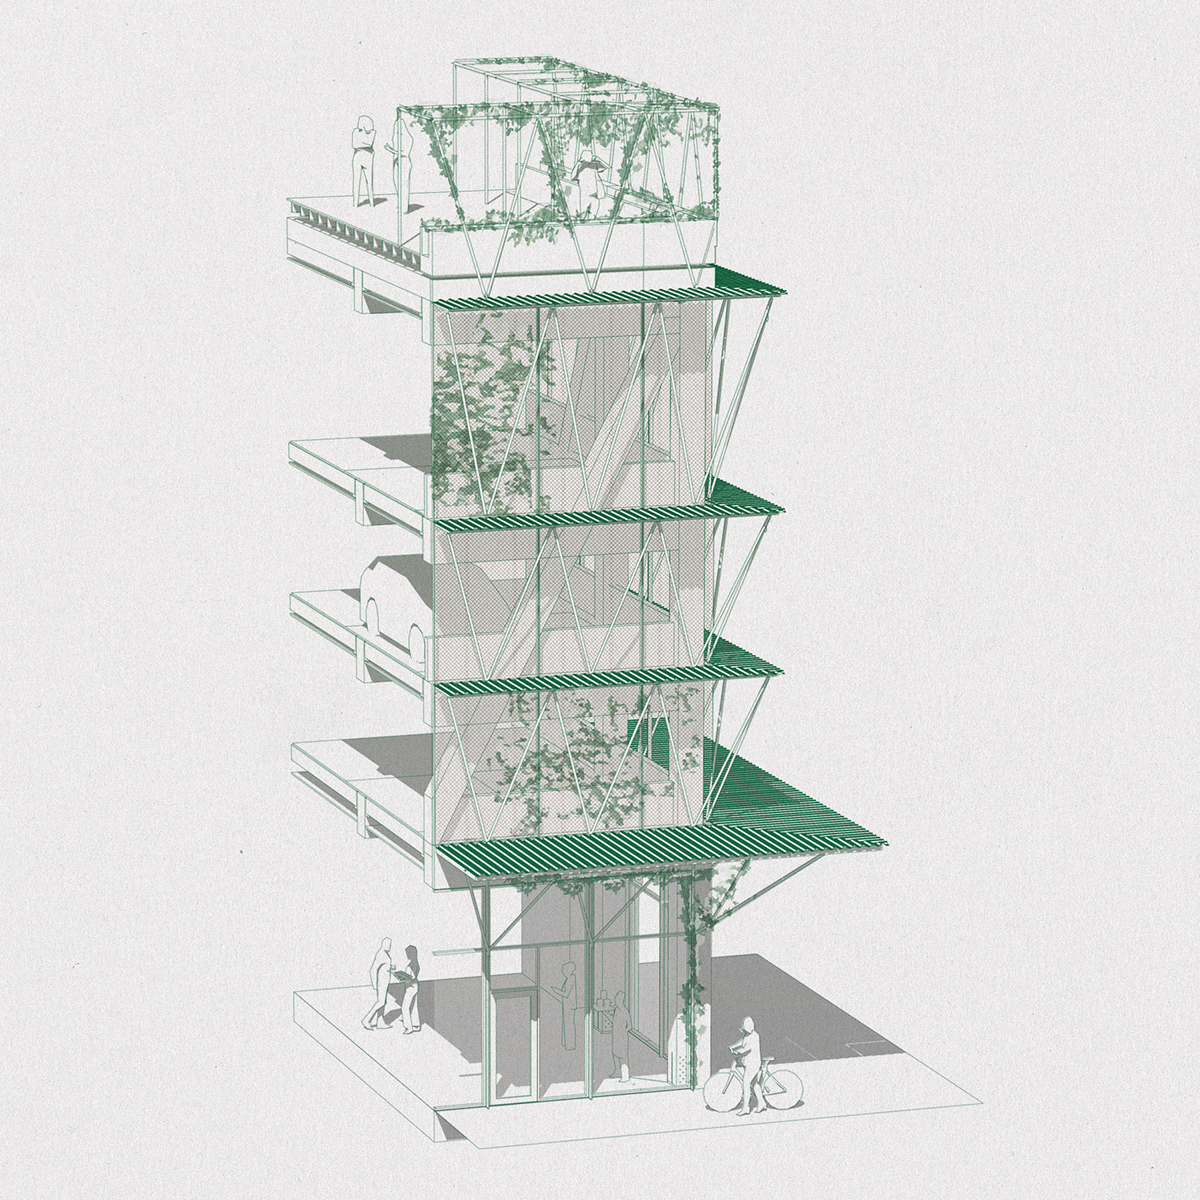 Axonometric drawing of building 